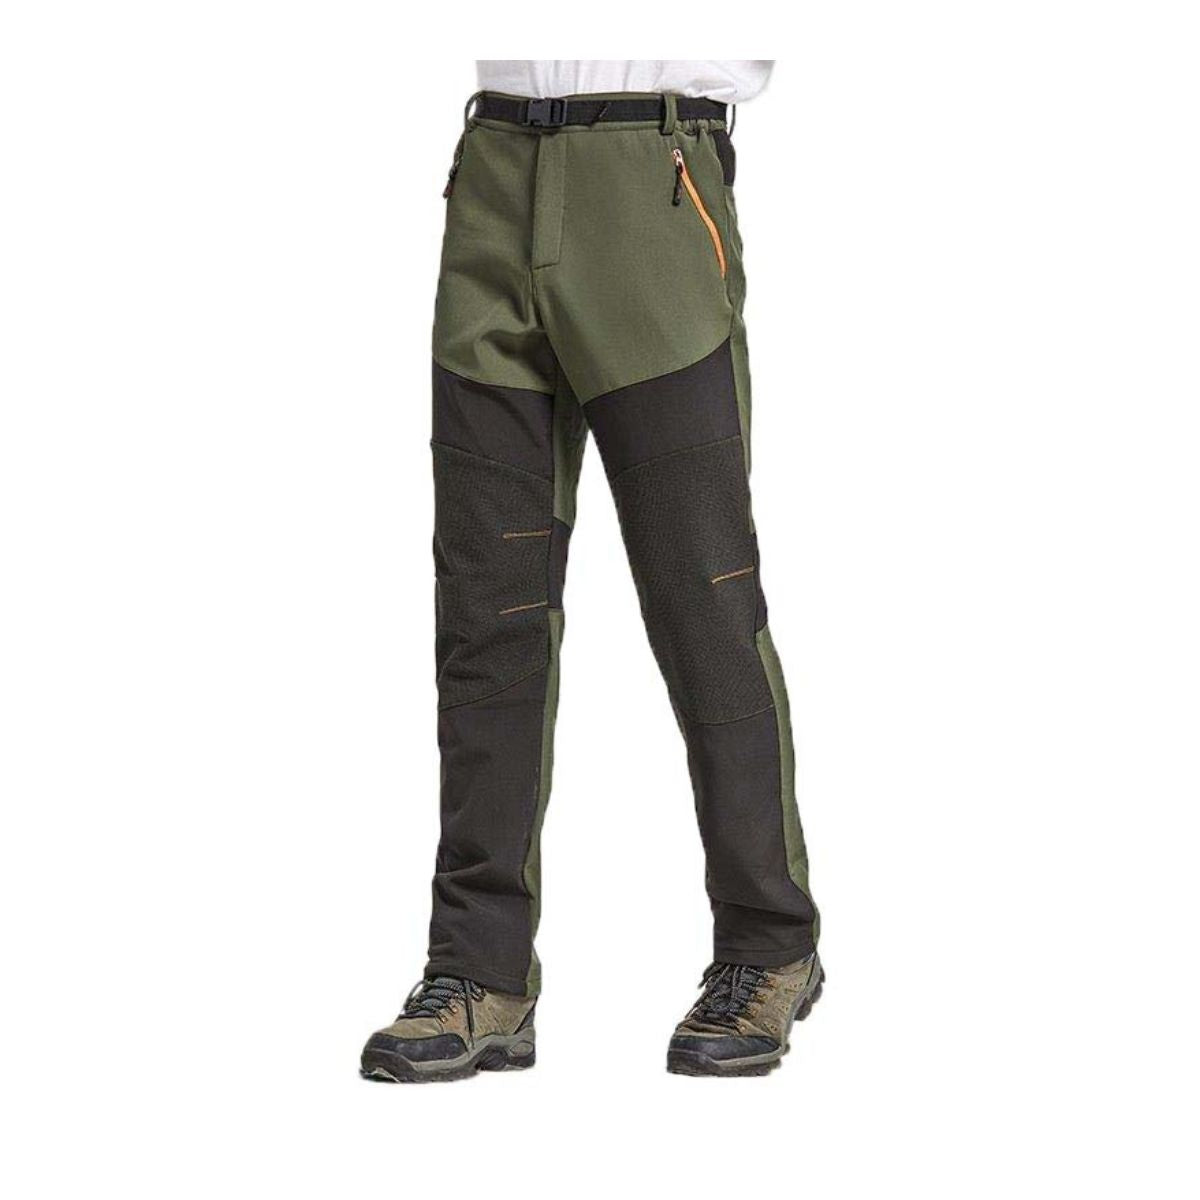 Men's CH Wind Quick Dry Hiking pants | FreeSoldier